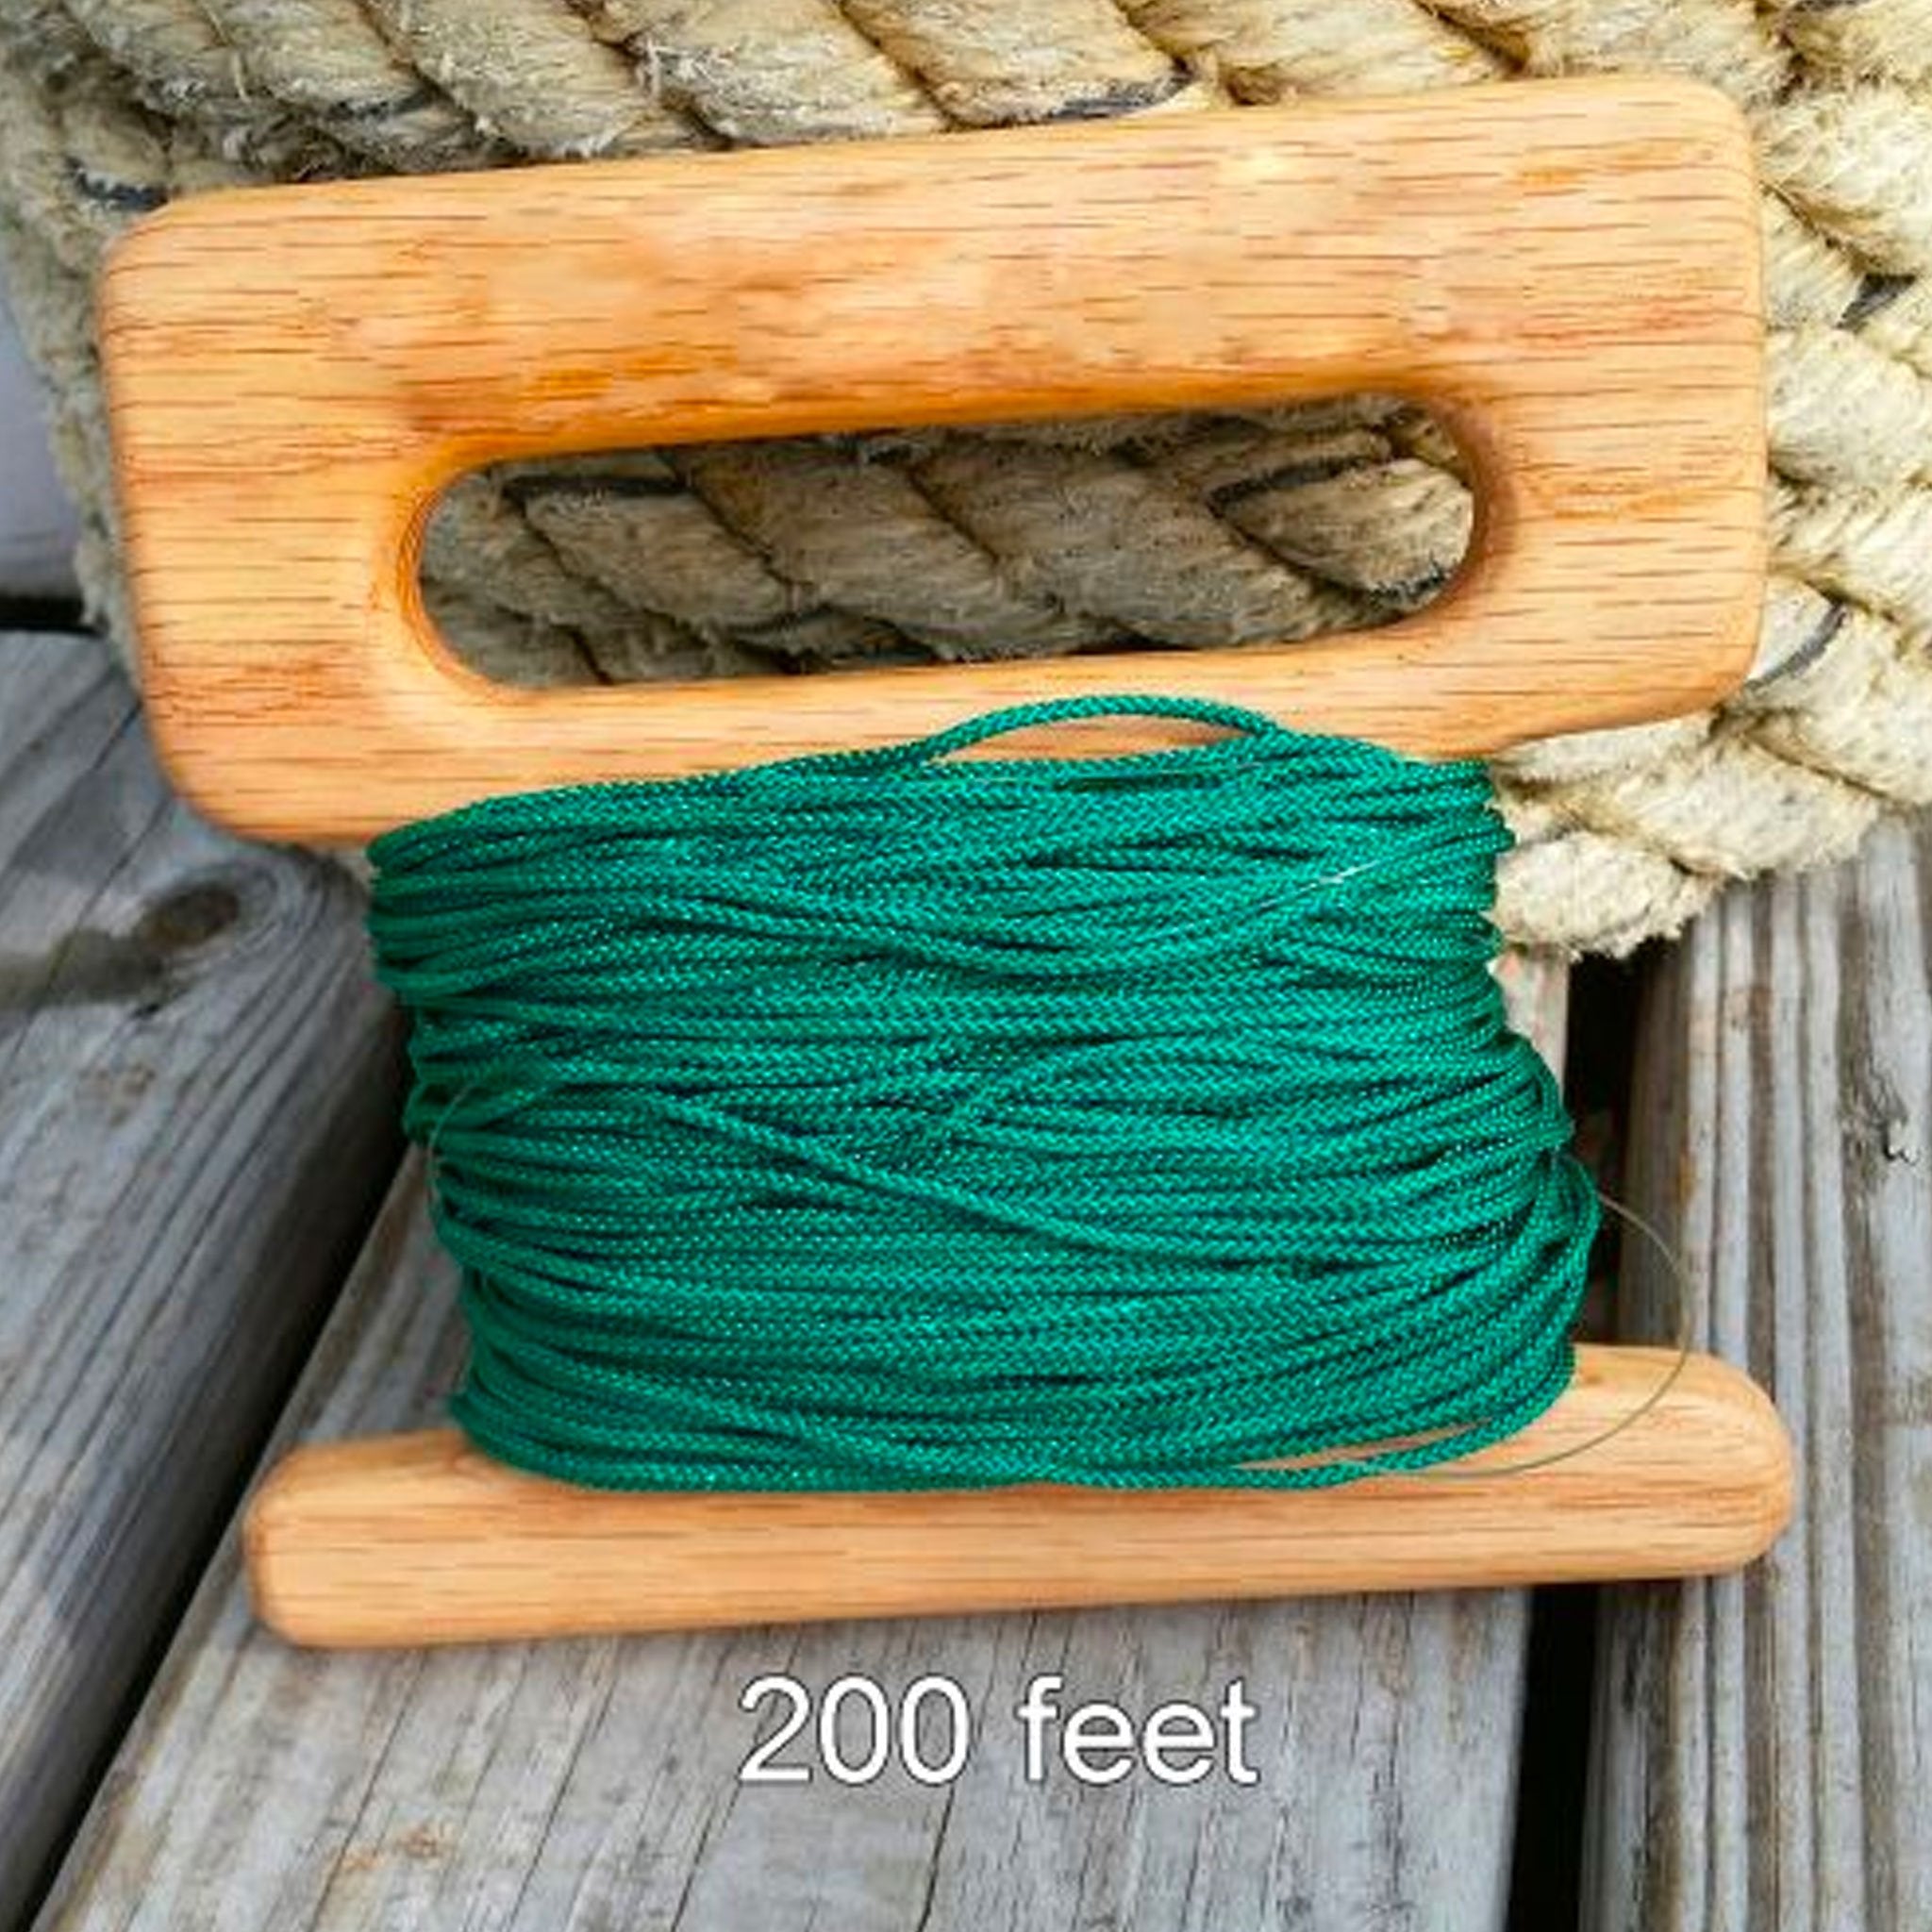 Easy Hold Hand Line- by New England Hand Line - KB White, hand line rope 